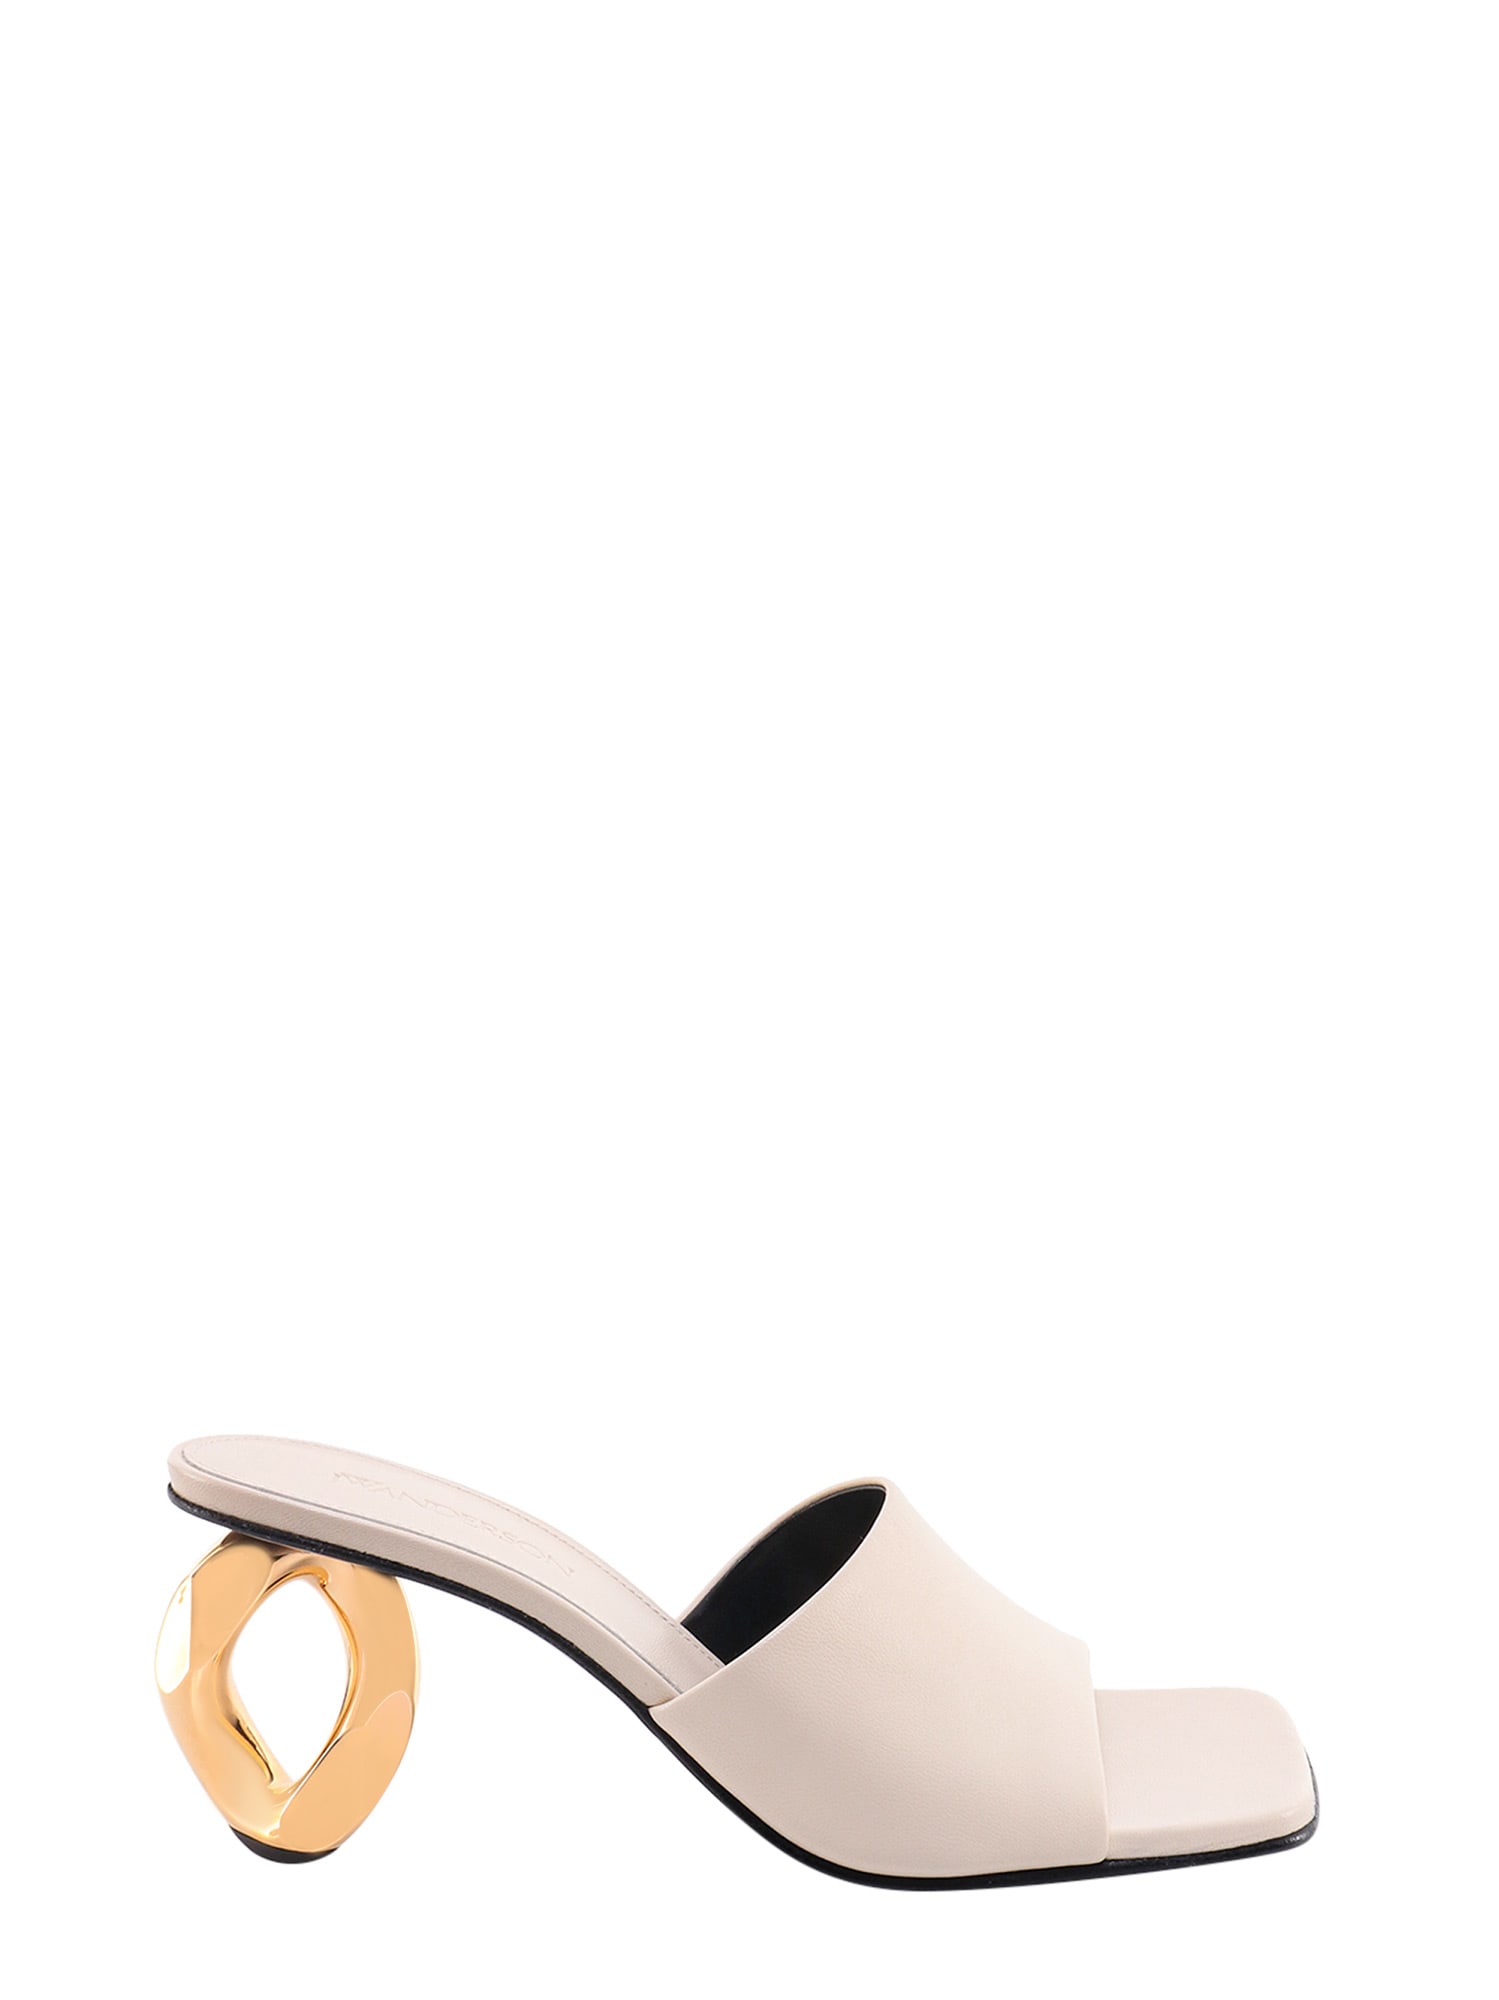 JW ANDERSON SANDALS